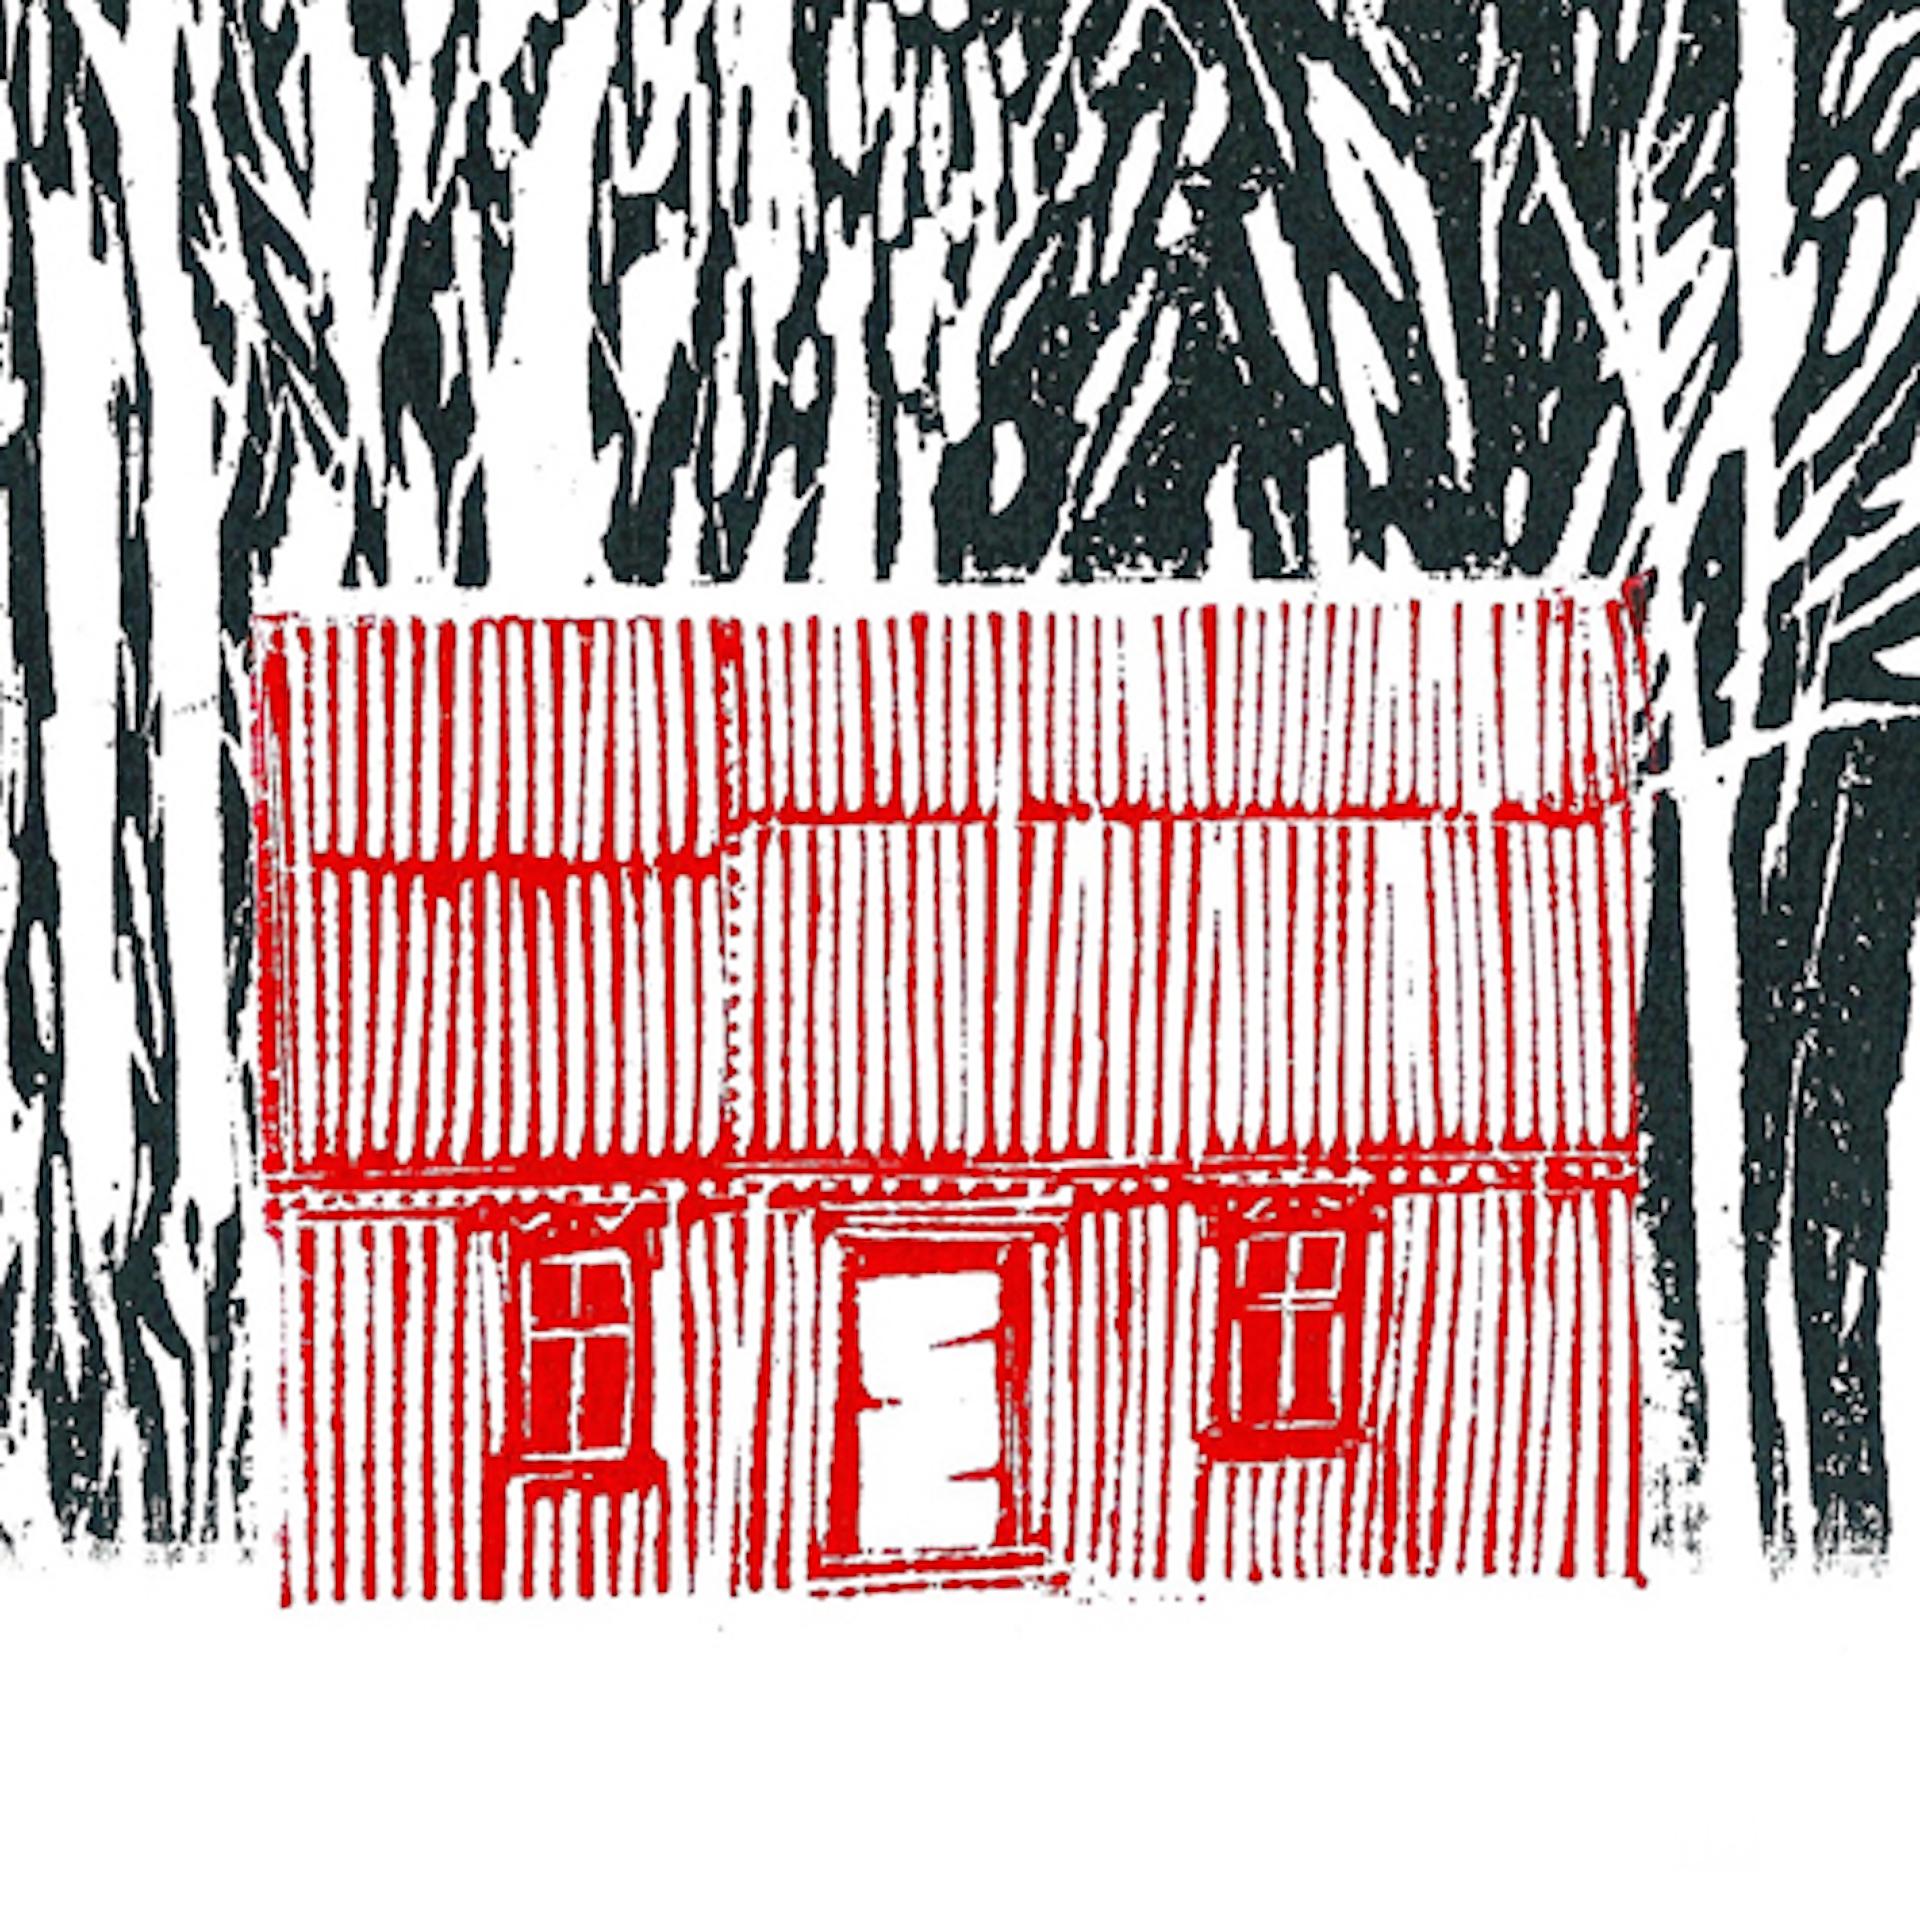 Philippa Thomas
Red House in the Woods
Limited Edition Wood Engraving
Edition of 10
Image Size: H 17.5cm x W 15cm
Sheet Size: H 29.7cm x W 42cm x D 0.01cm
Sold Unframed
Please note that in situ images are purely an indication of how a piece may